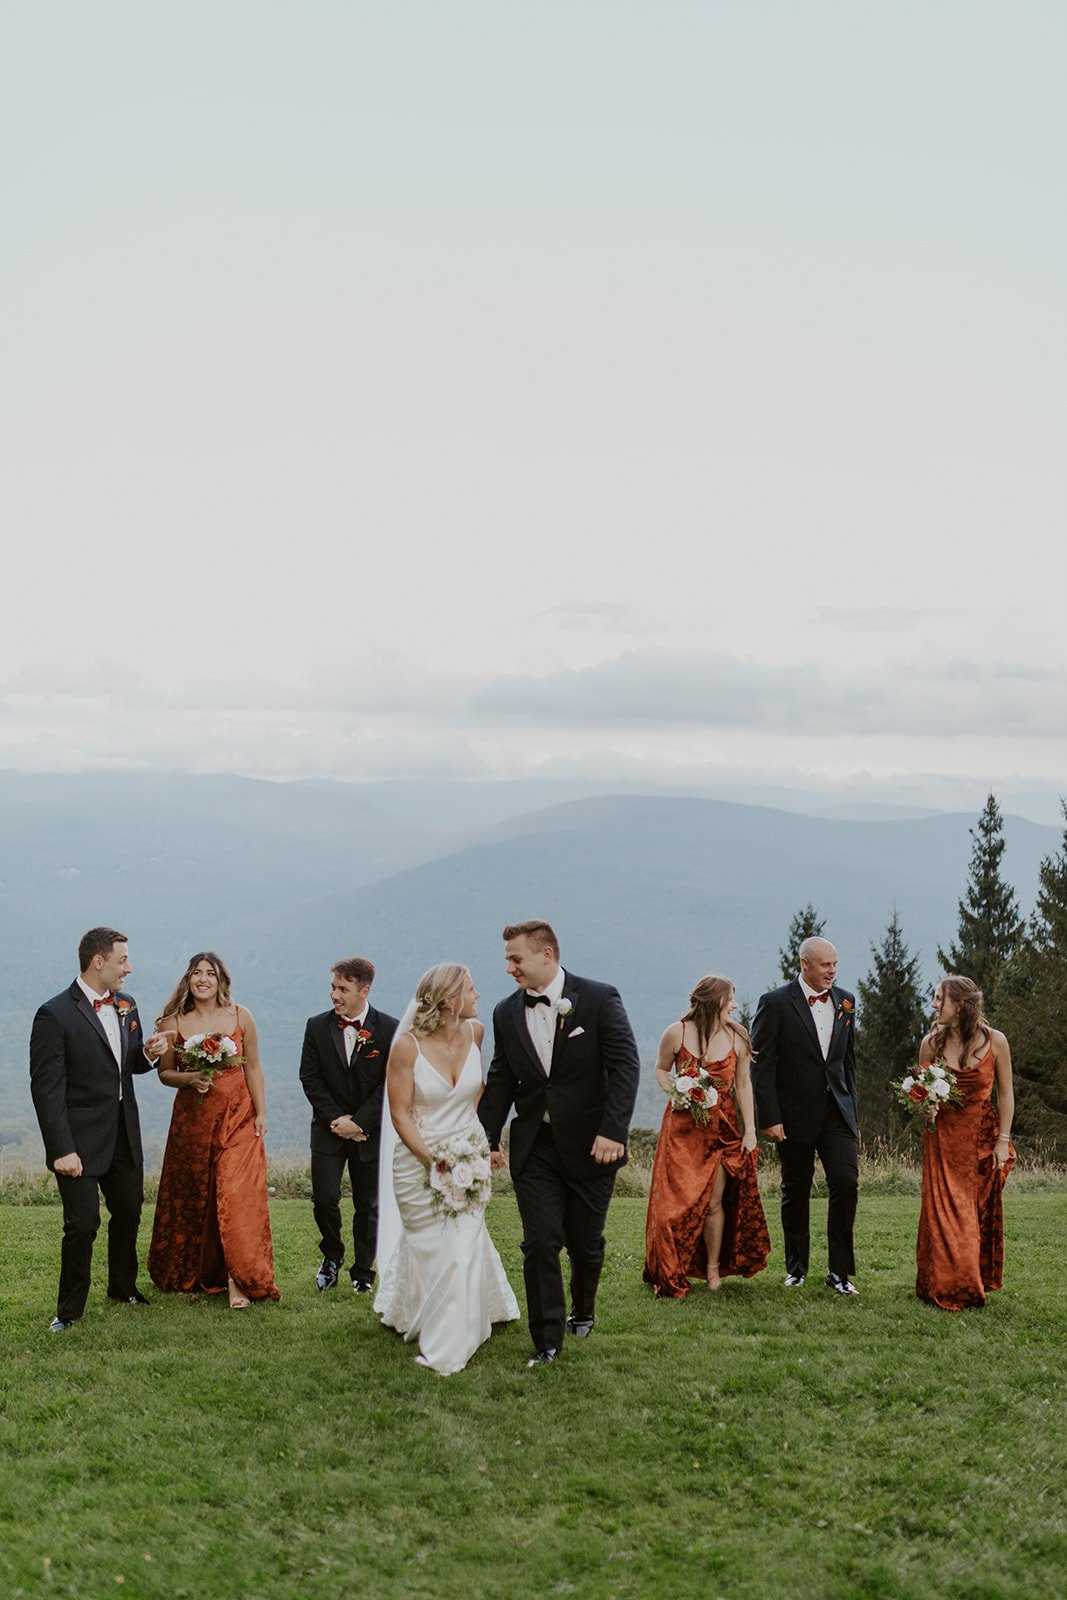 The entire bridal party walk together on the top of the mountain.